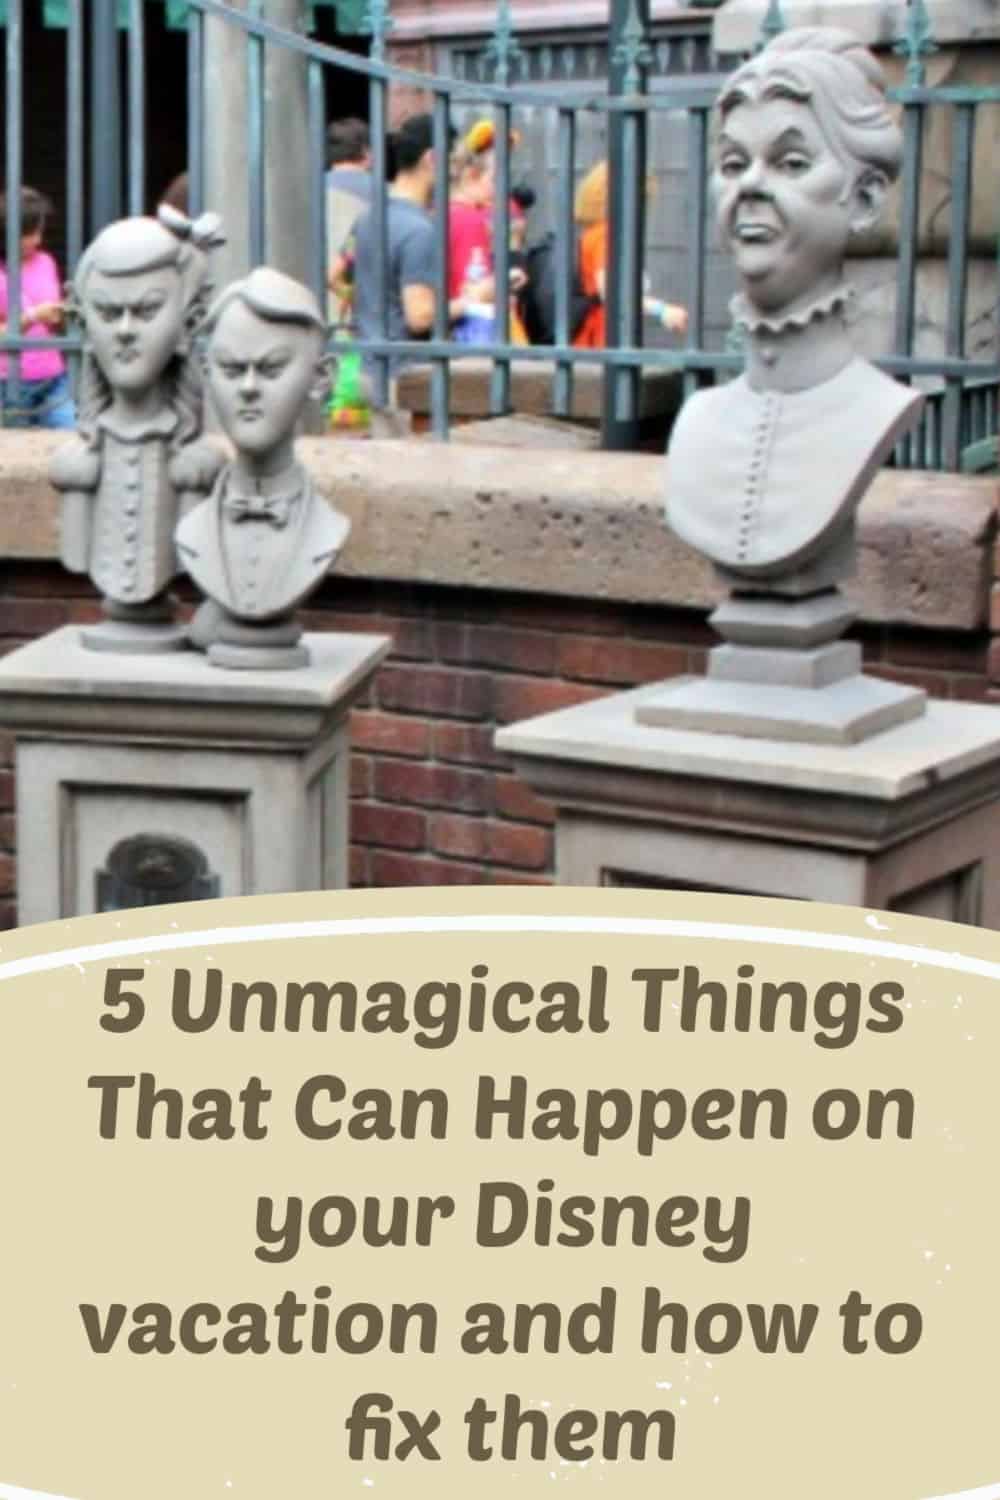 5 Unmagical Things That Can Happen on your Disney vacation and how to fix them